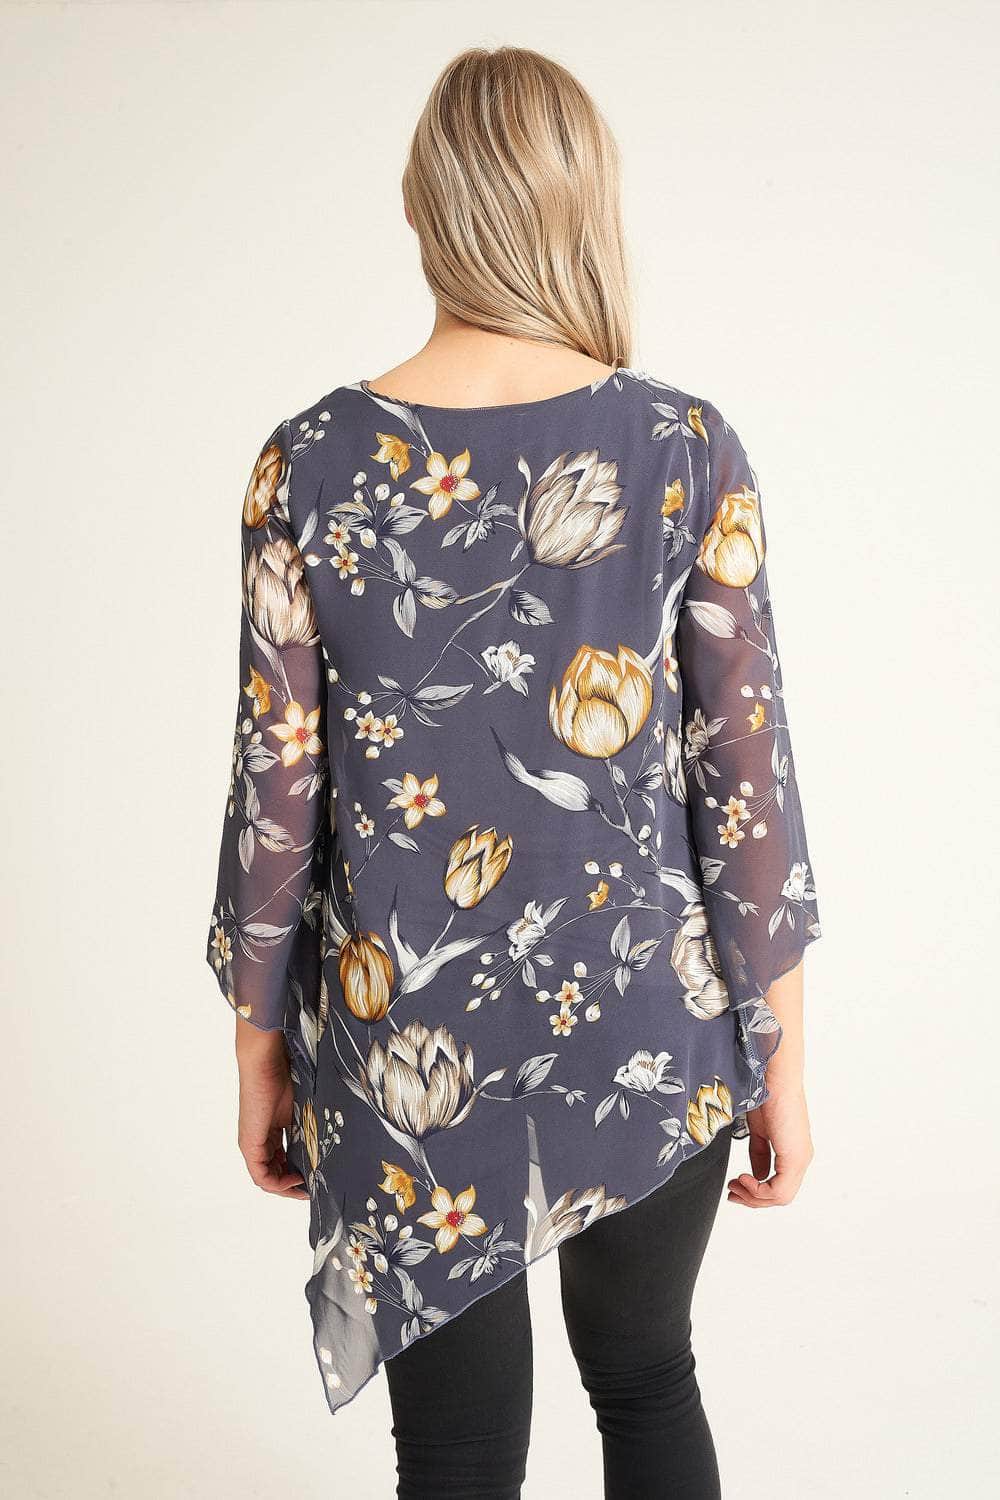 Saloos Lined Floral Print Chiffon Tunic Top